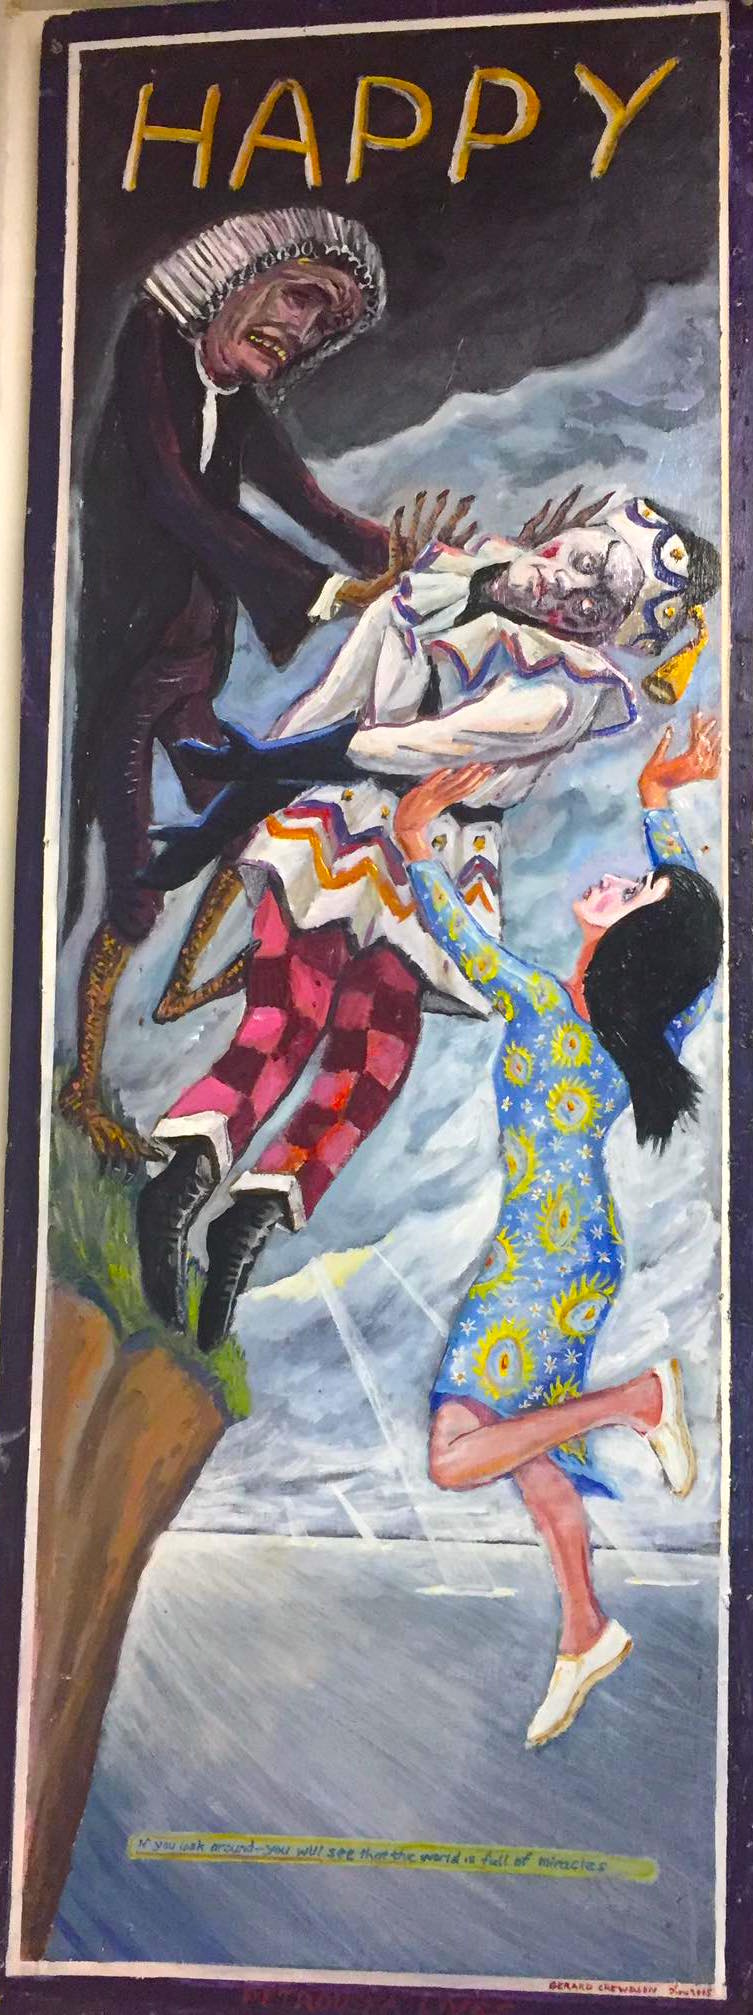 Painting of clown figure getting pushed off a cliff by lawyer